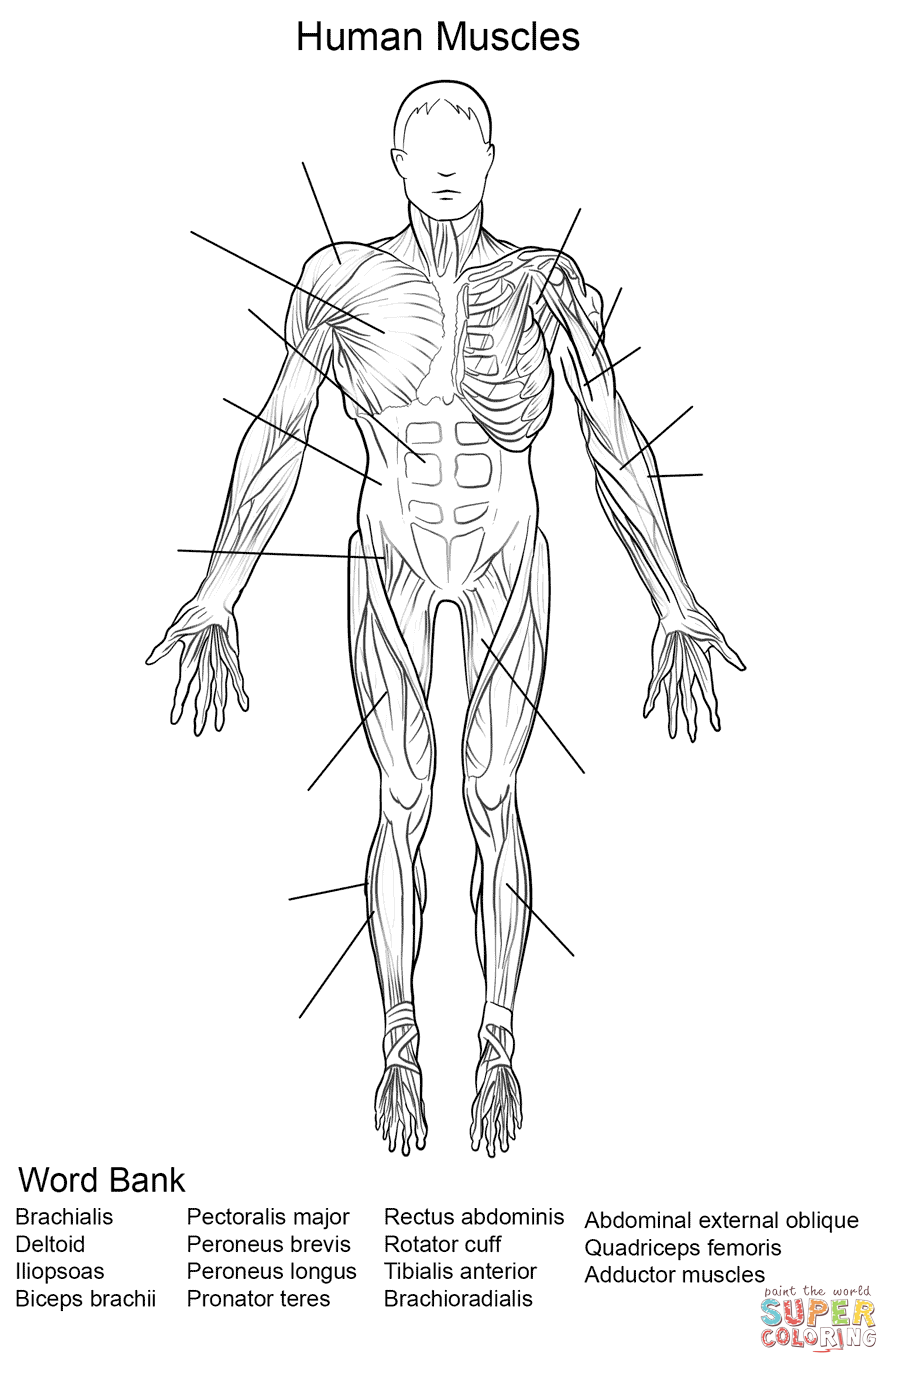 Human Muscles Front View Worksheet Coloring Page Free Printable 